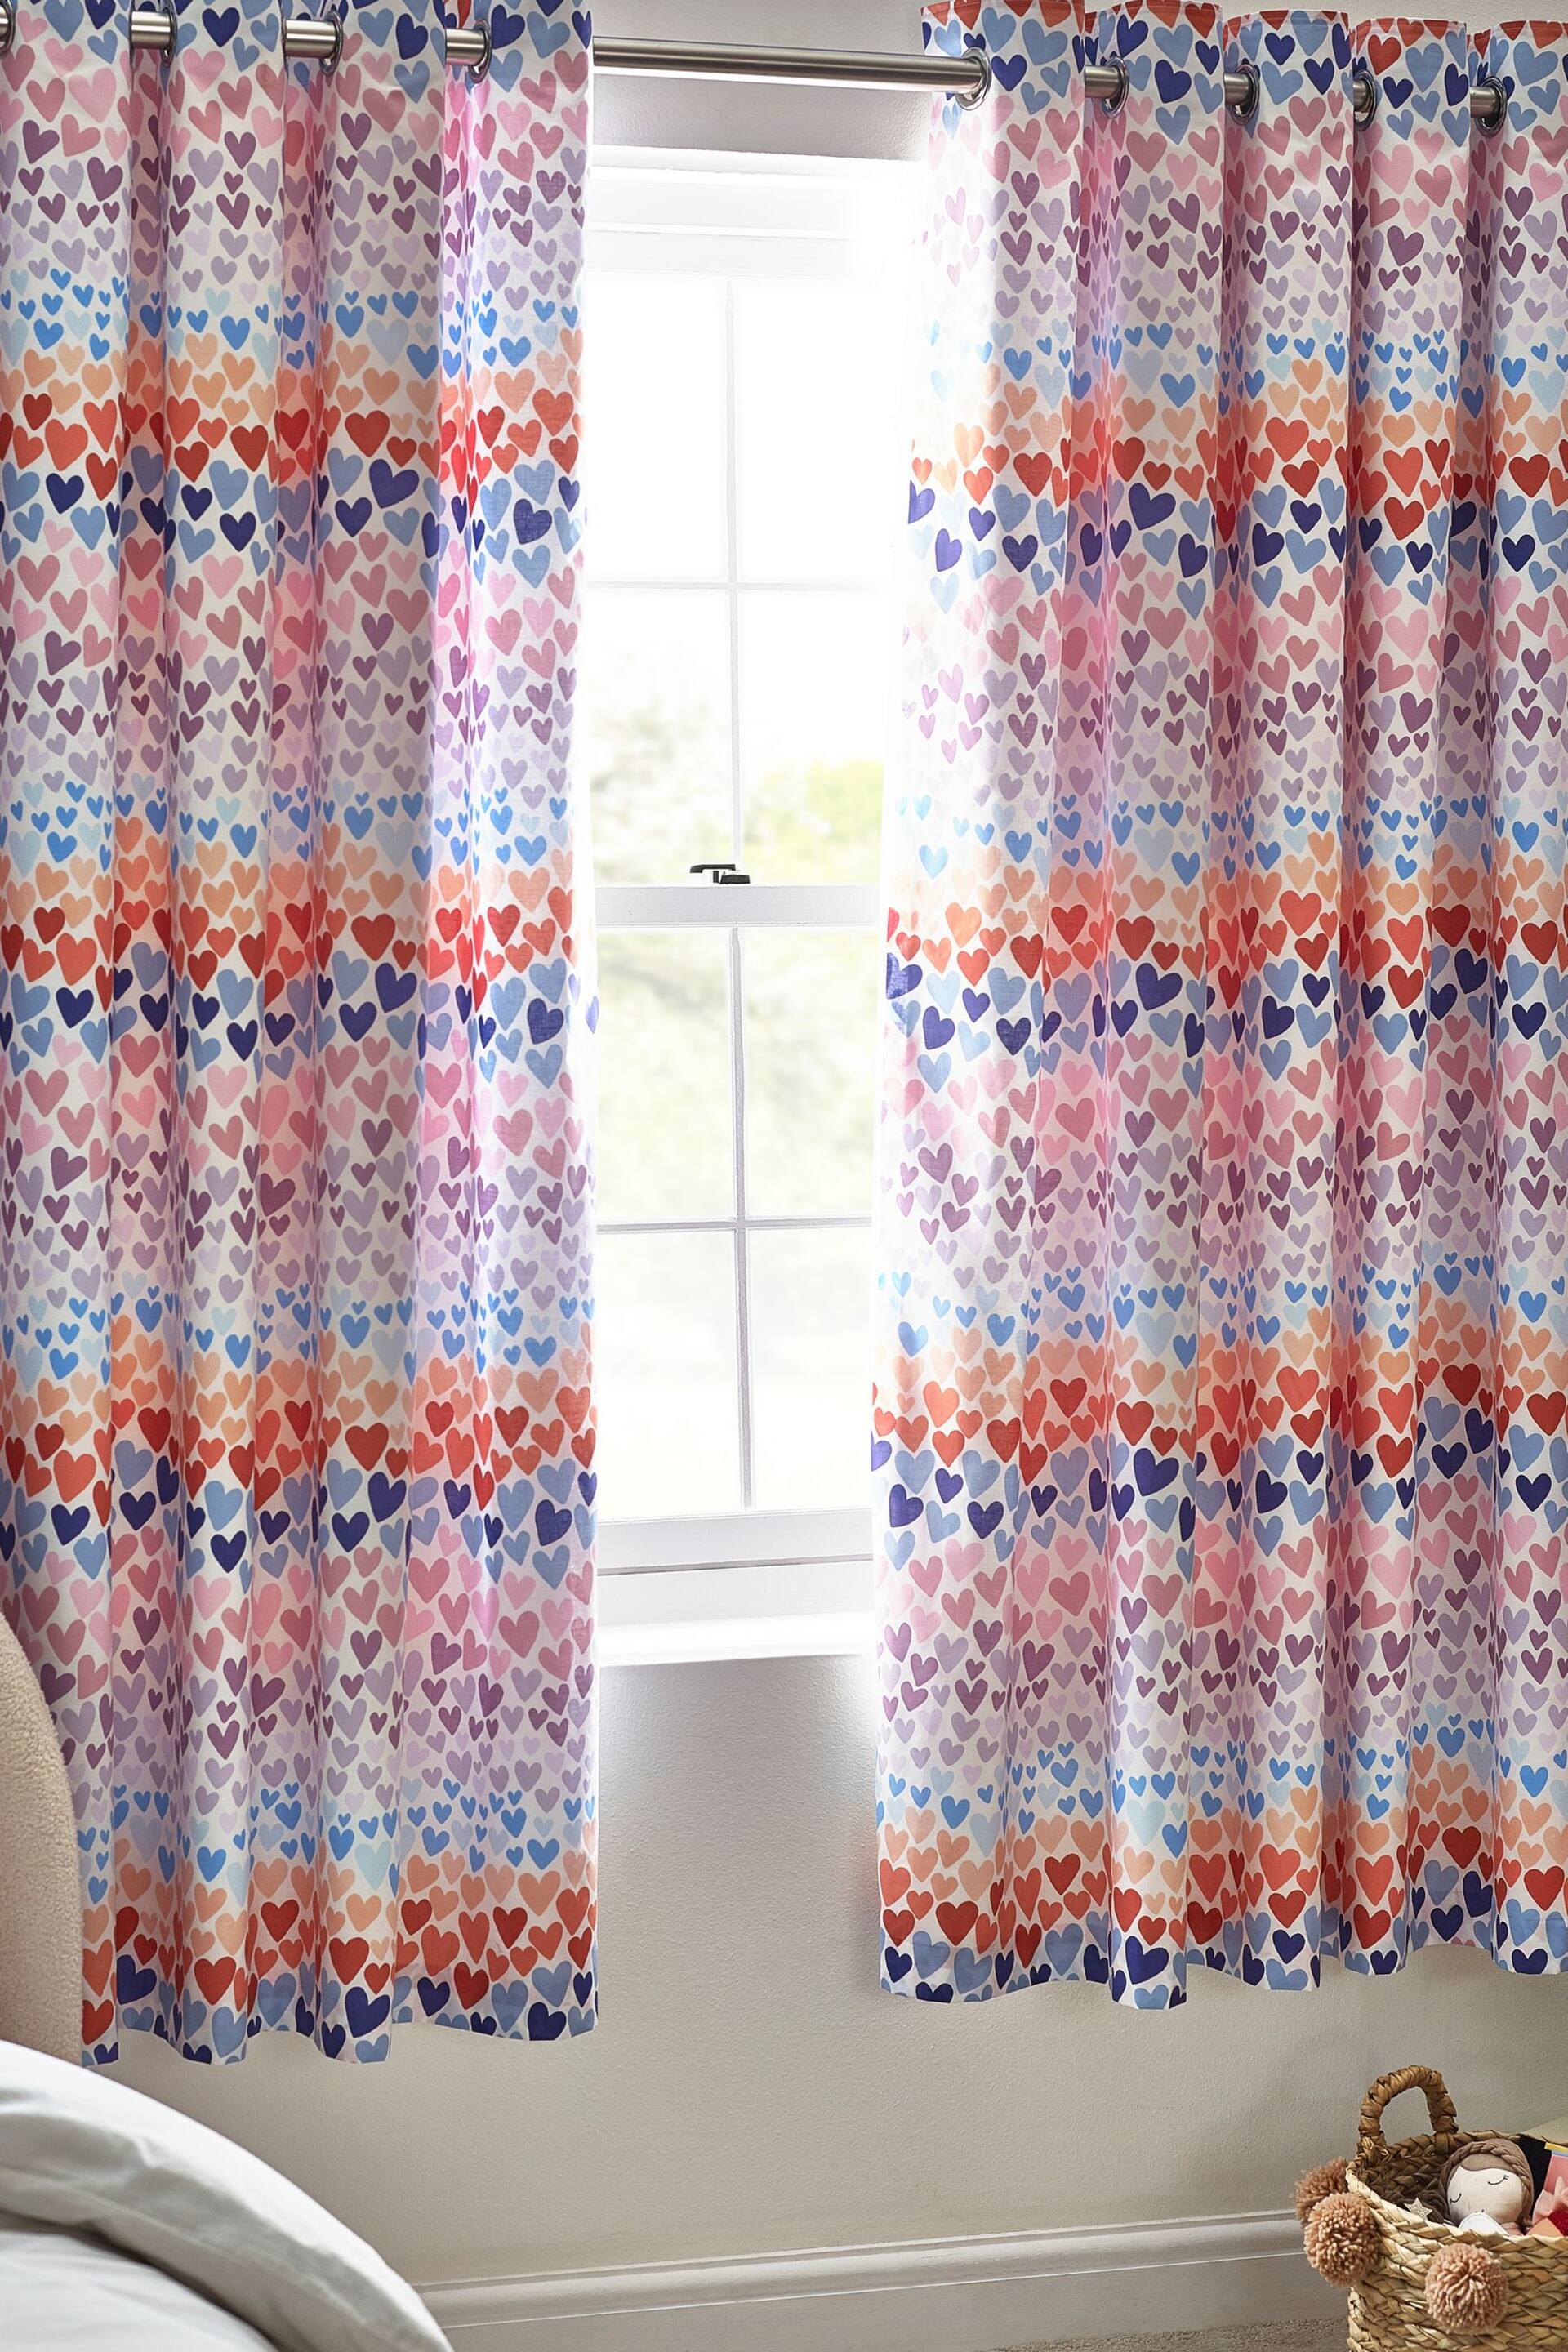 Multi Rainbow Ombre Eyelet Blackout Curtains - Image 1 of 4